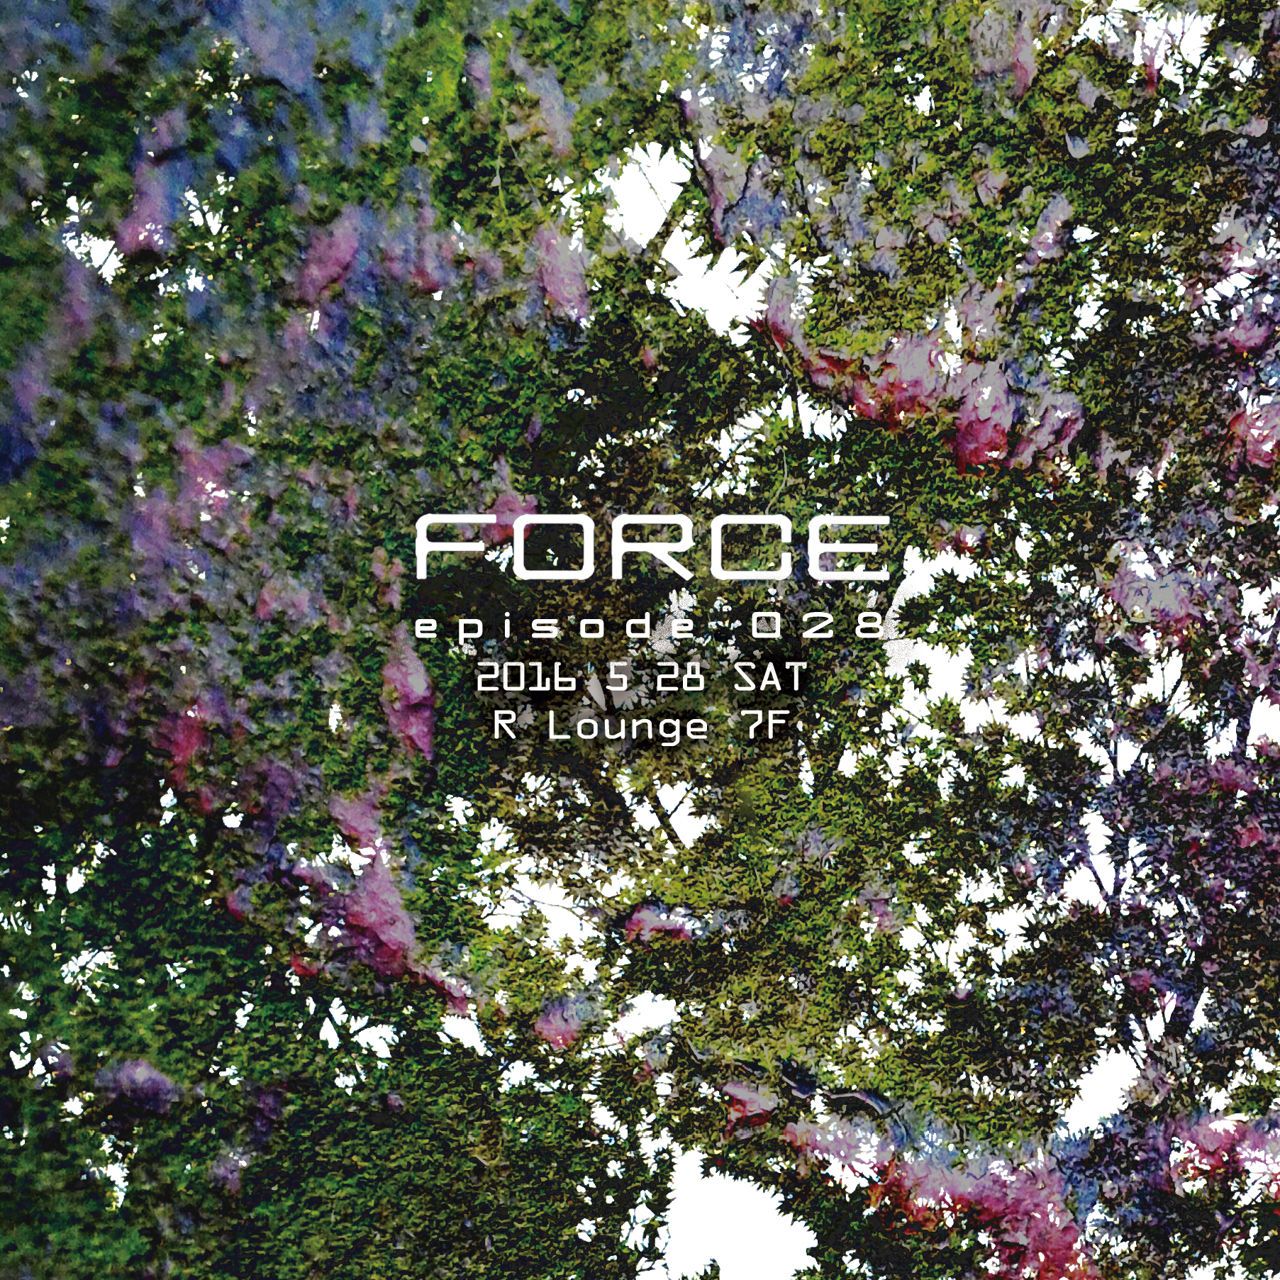 FORCE episode 028 (7F)